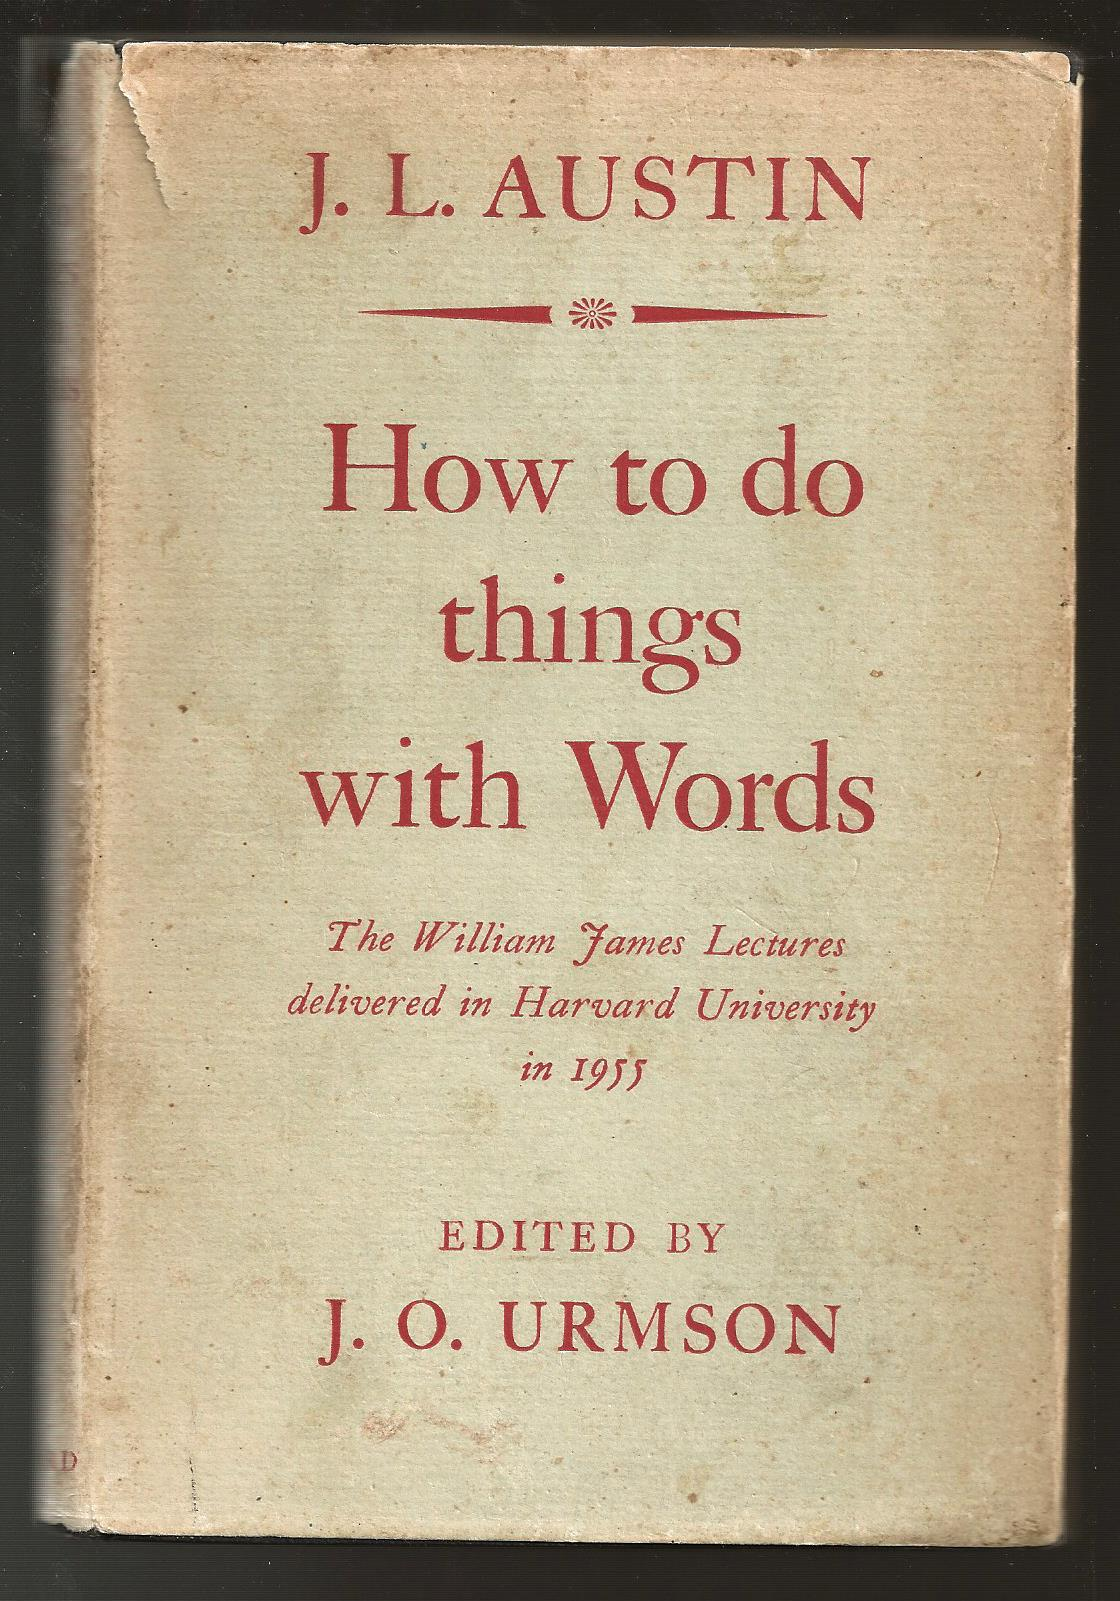 That s a thing to do. Джон Остин речевые акты. How to do things with Words. How to do things with Words Austin. Джон Остин юридический позитивизм.